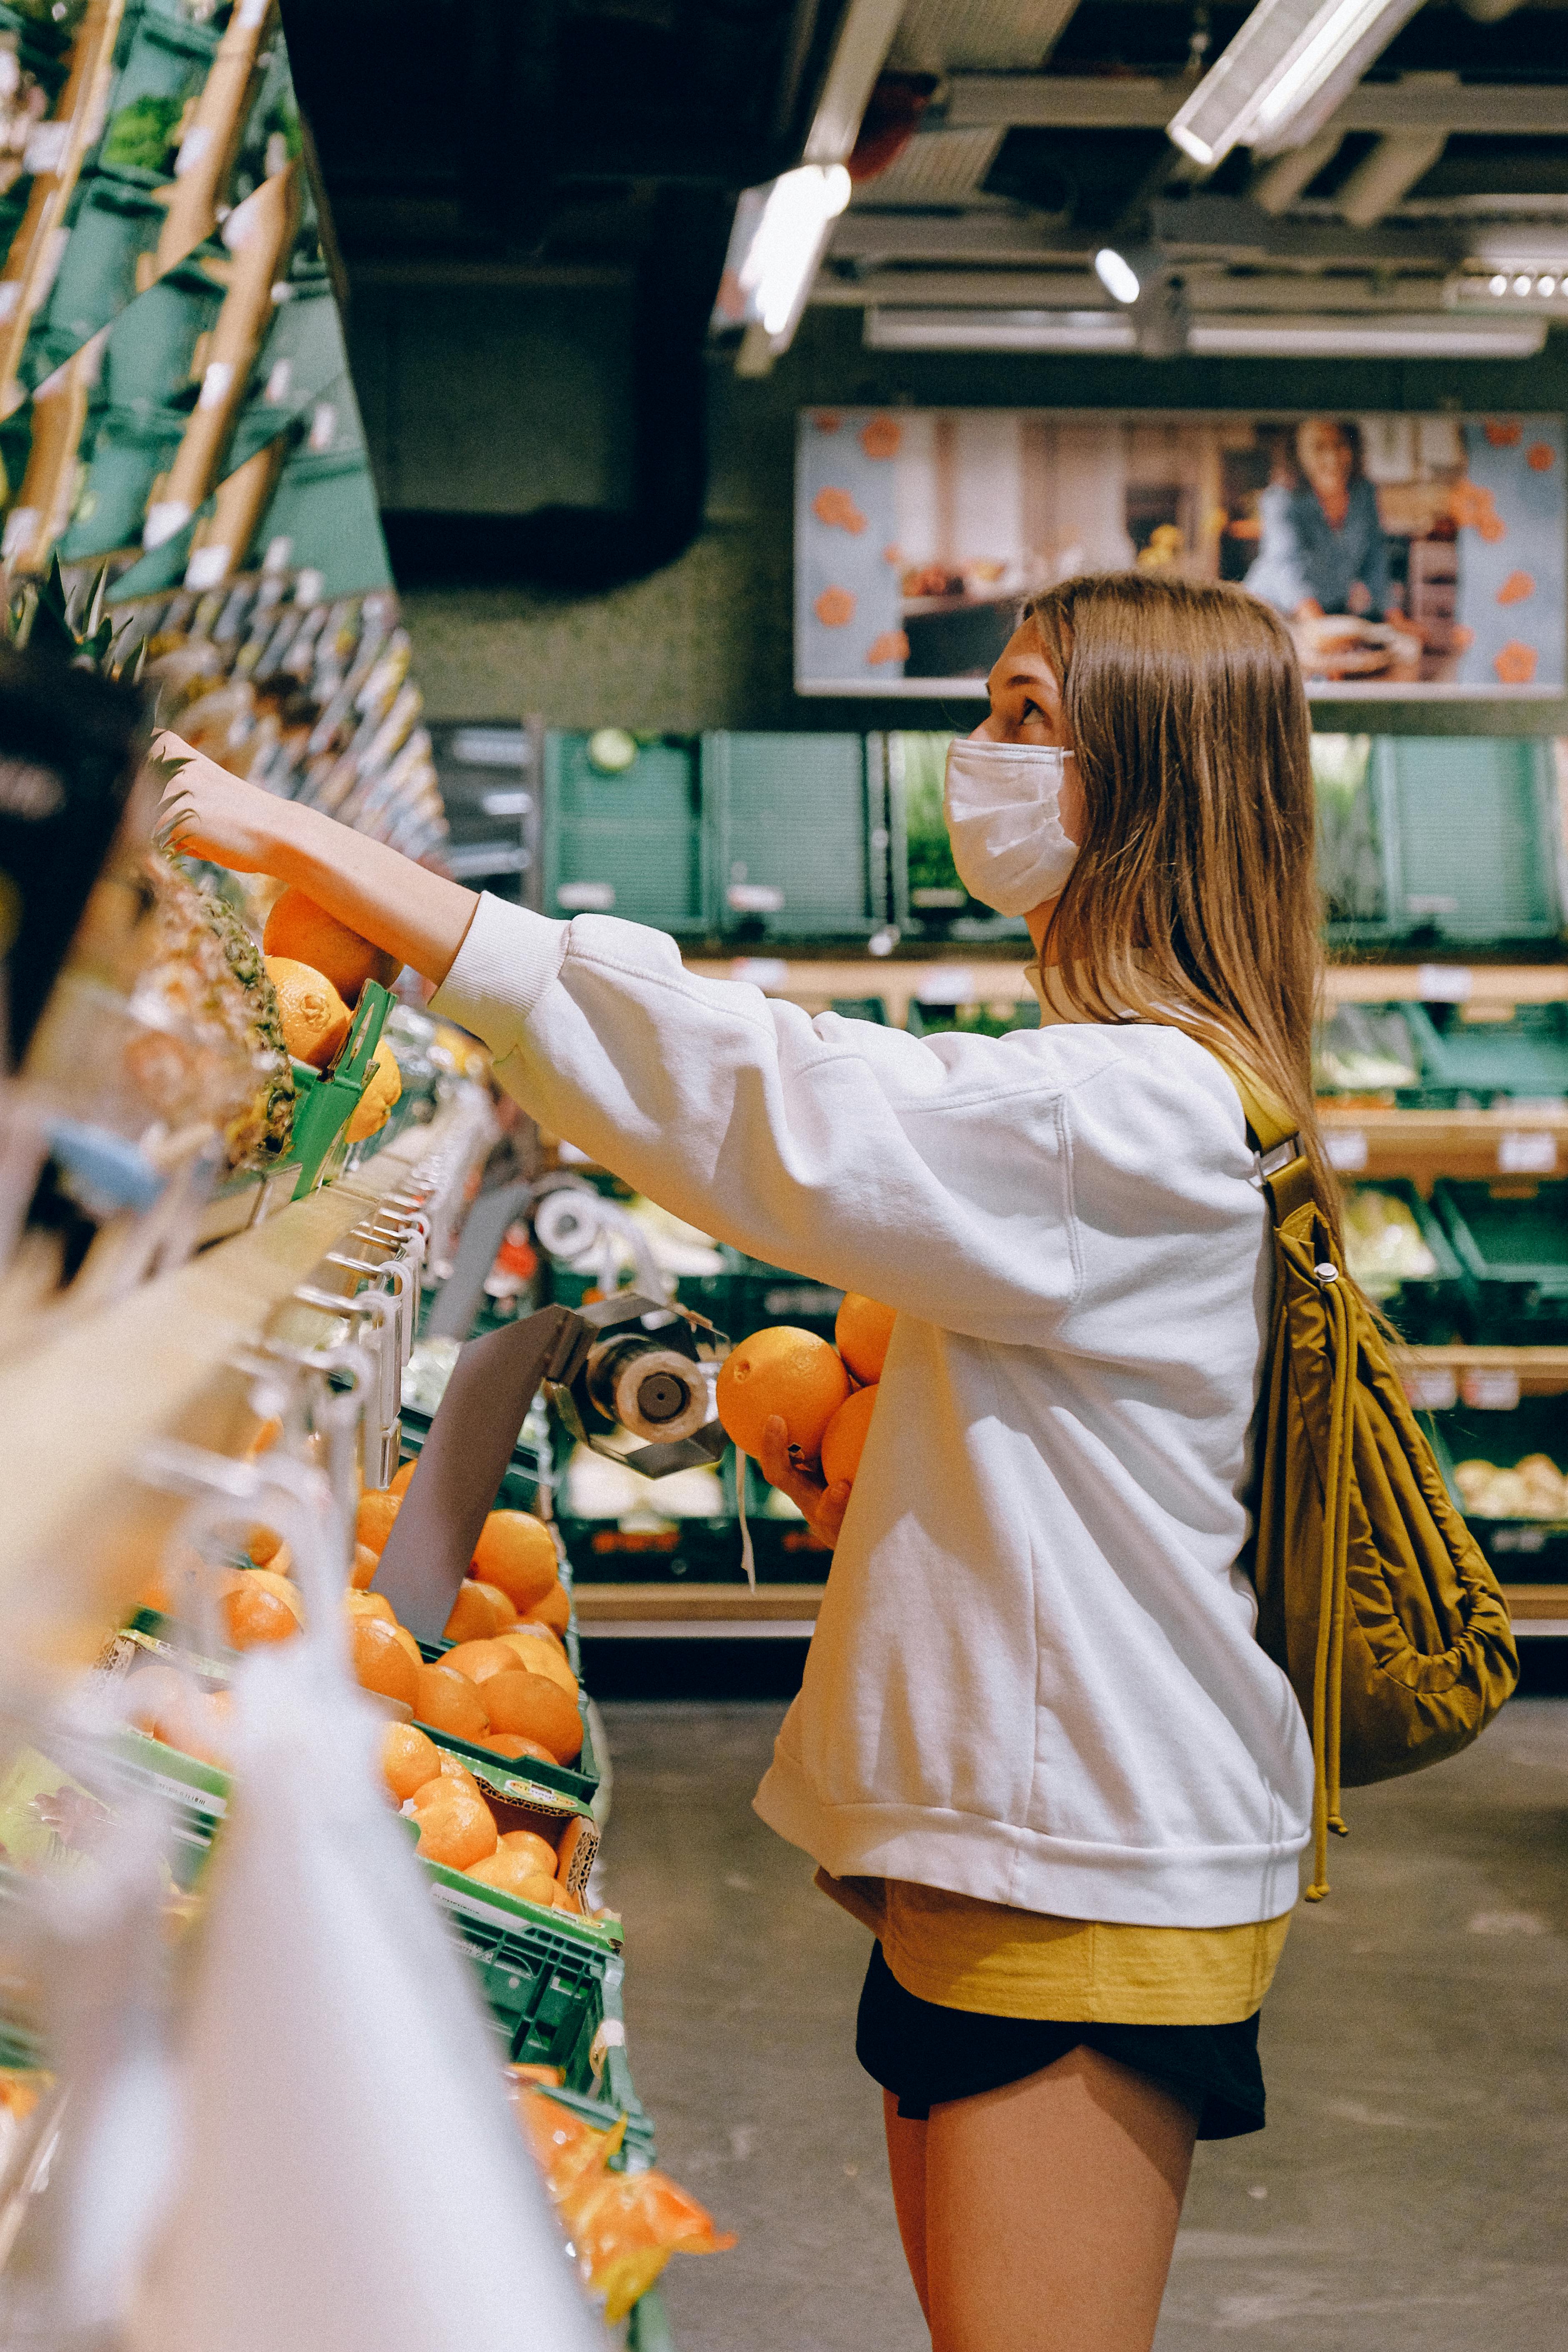 A woman grocery shopping | Source: Pexels